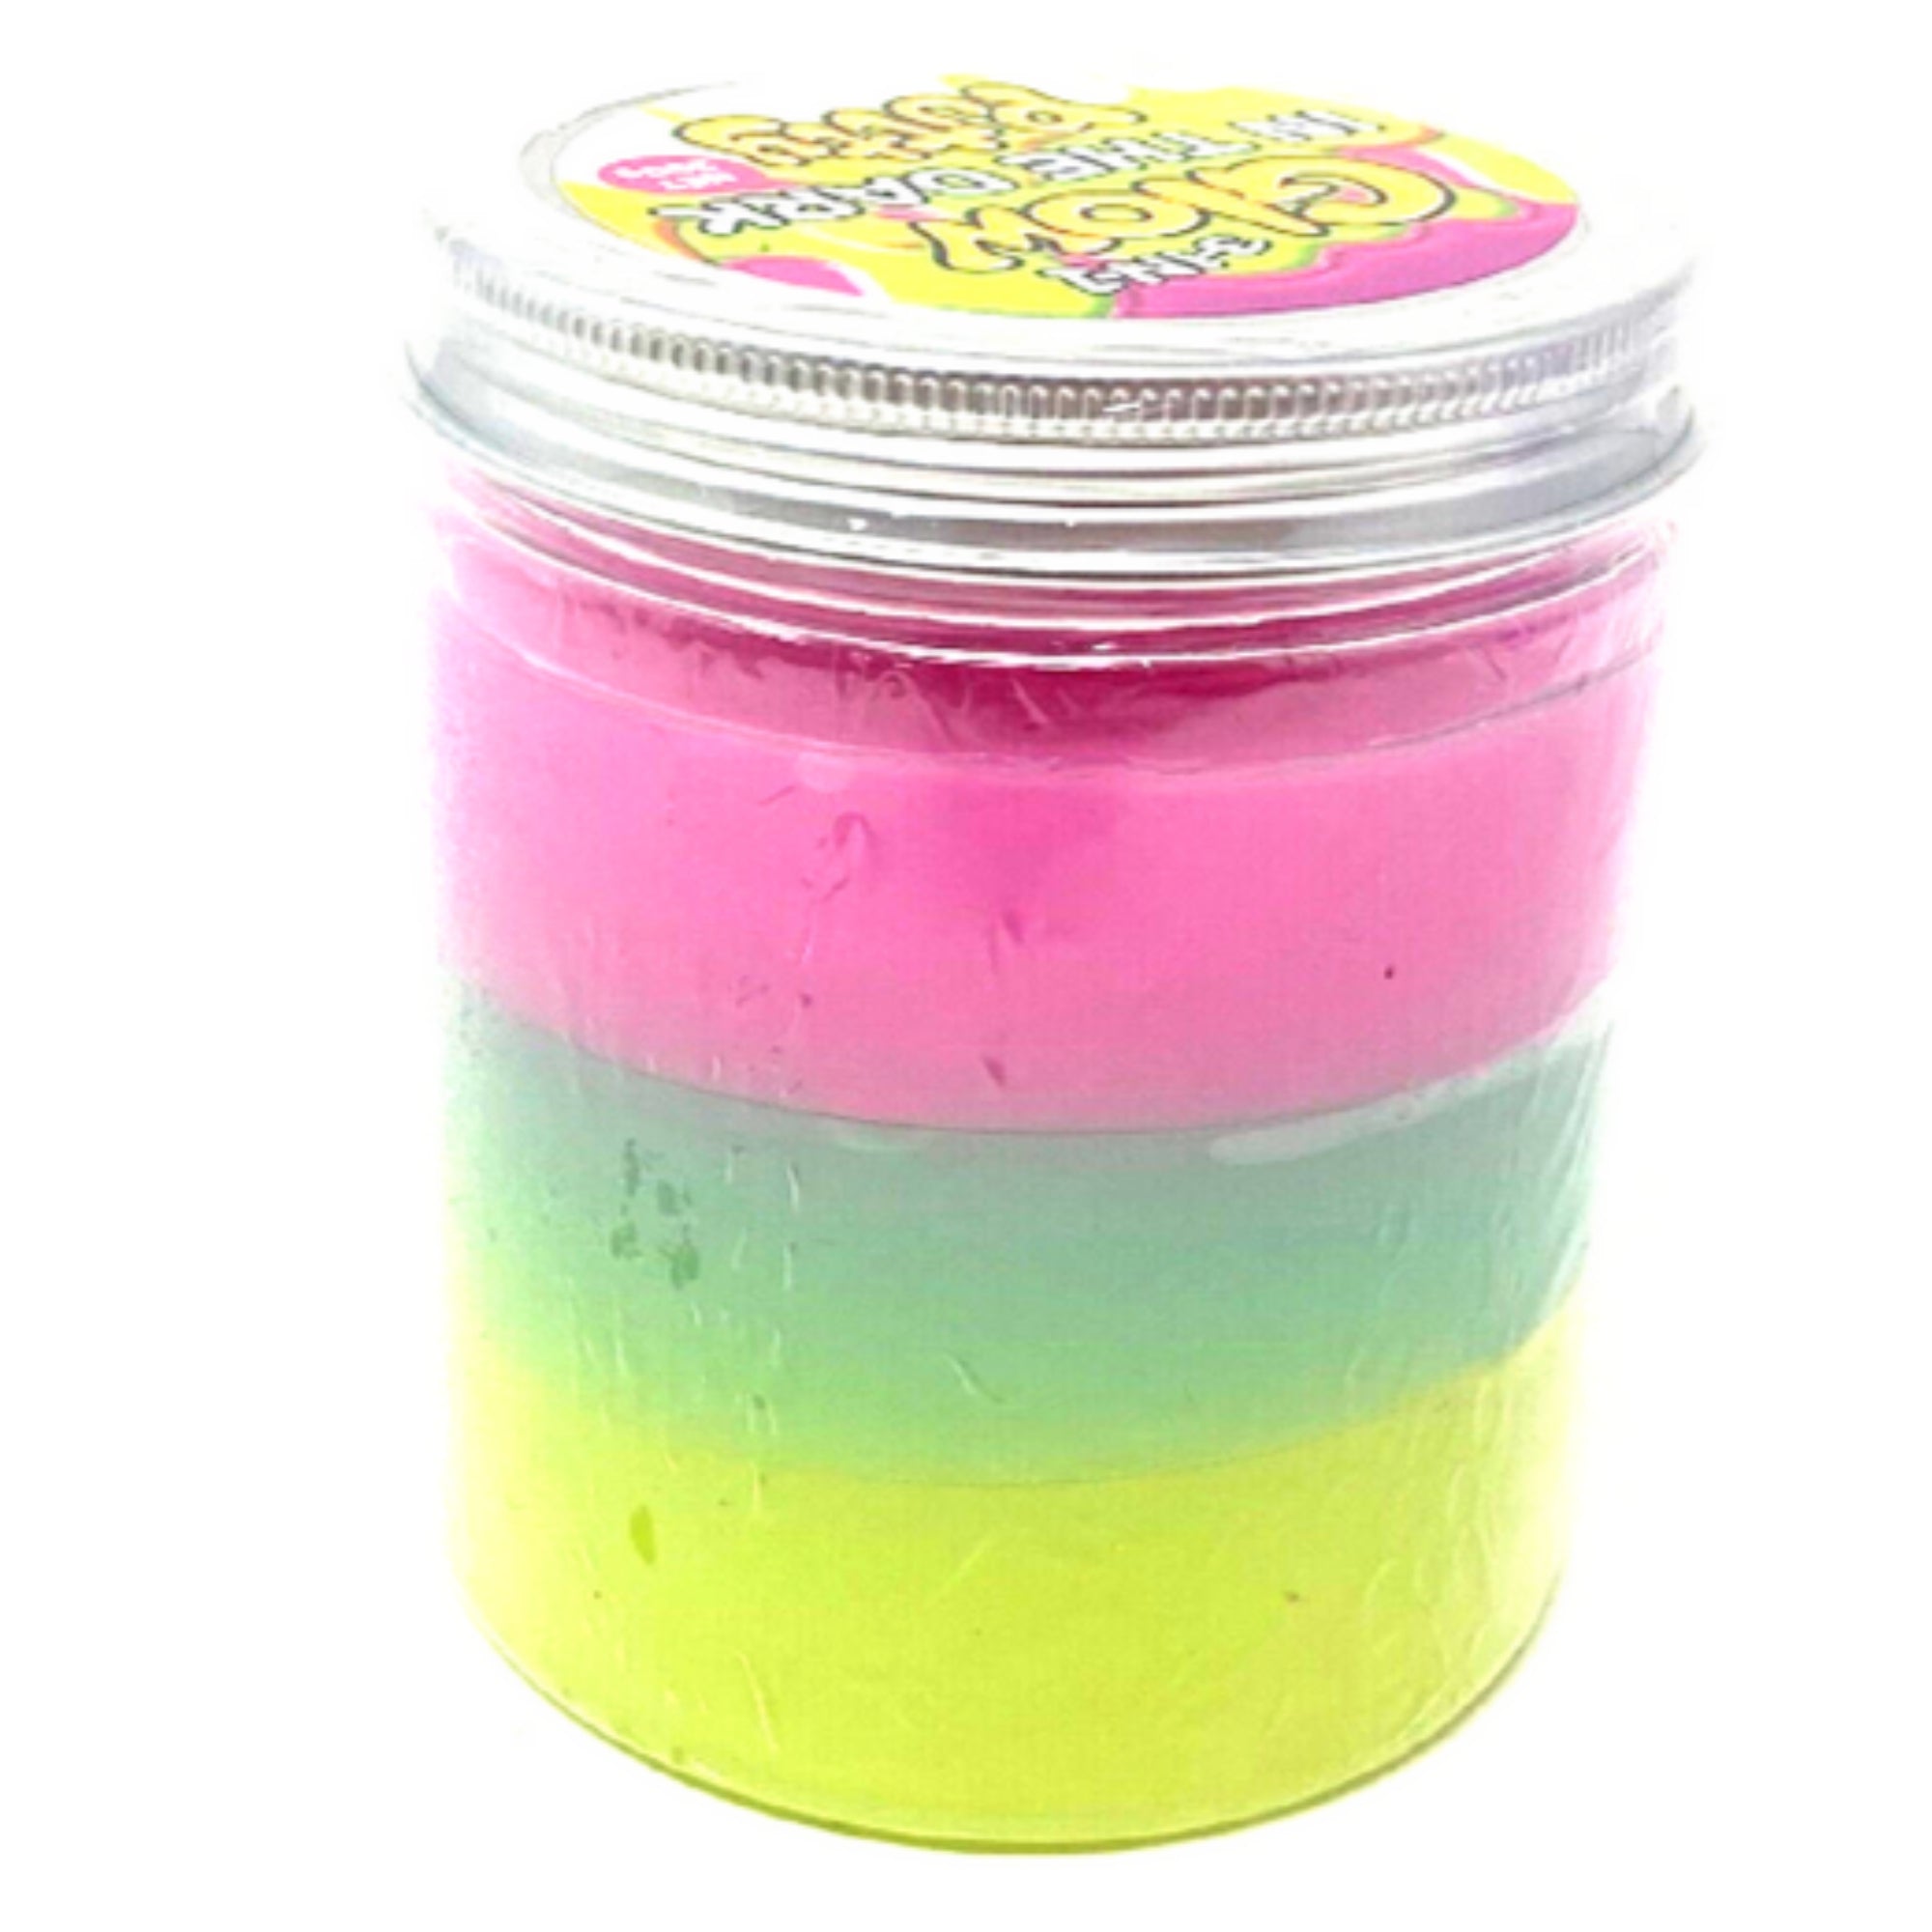 3-In-1 Glow In The Dark Putty, Bring your imagination to life with this tub of glow in the dark putty! Create endless shapes and designs by moulding and stretching the putty to your heart's desire. With 390g of putty per tub, you'll have plenty to work with.What's even more exciting is that this putty glows in the dark! Simply leave it in the light for a while to charge it up, then enjoy the luminous glow when the lights go out. It's perfect for creating your own glowing decorations or adding a fun touch to